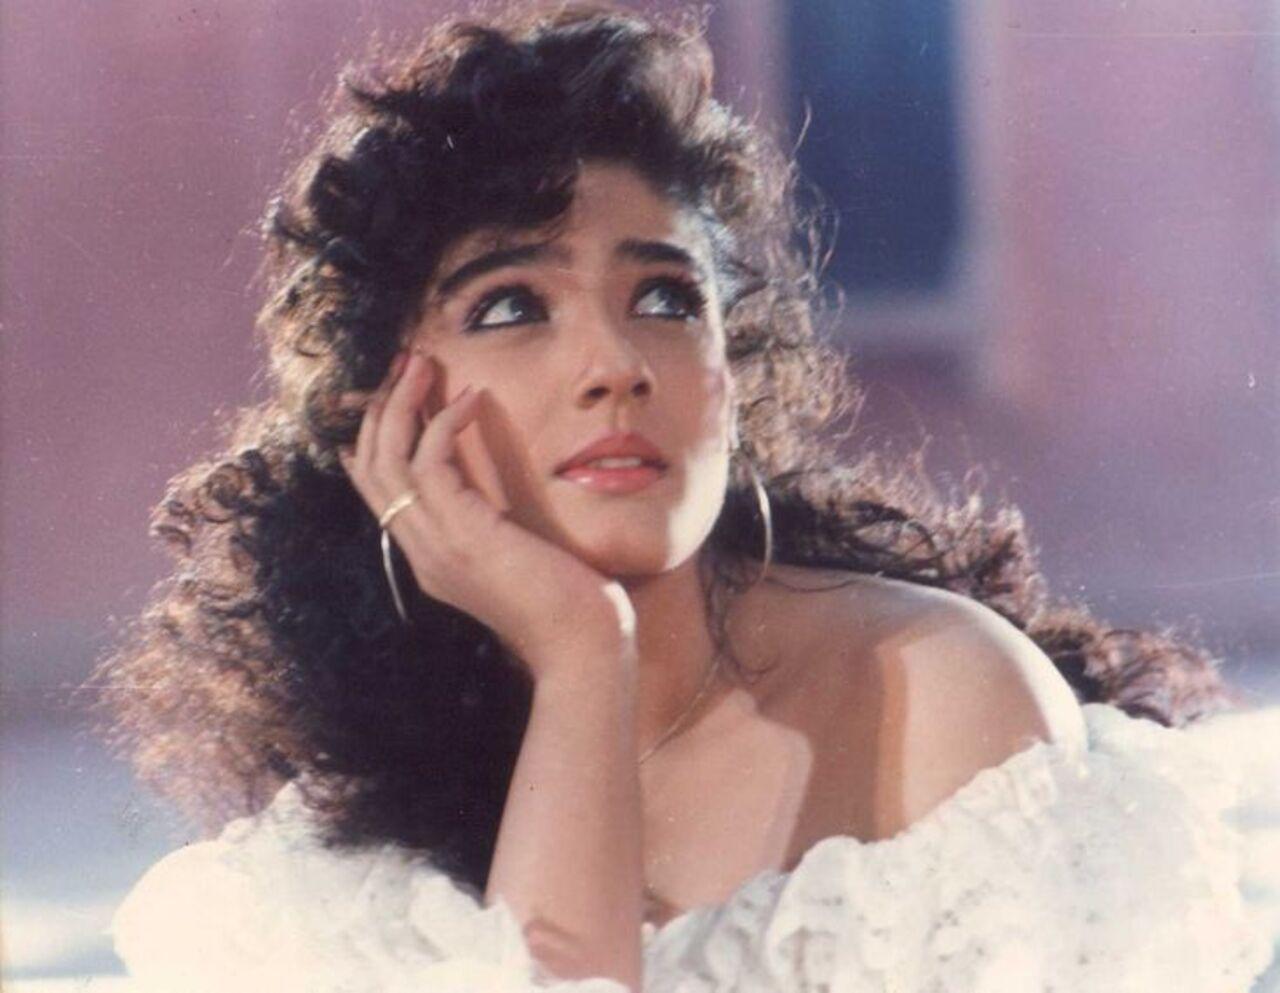 The perm
While perms were making waves in the West, Bollywood got a taste of it through Pooja Bhatt, showcasing the frizzy style in 'Daddy' and 'Dil Hai Ki Manta Nahin'. Even though perms weren't the best for hair health, the trend caught fire. Stars like the ravishing Raveena Tandon and the late Divya Bharti embraced the style in subsequent films, giving Bollywood hairdos a uniquely edgy flair